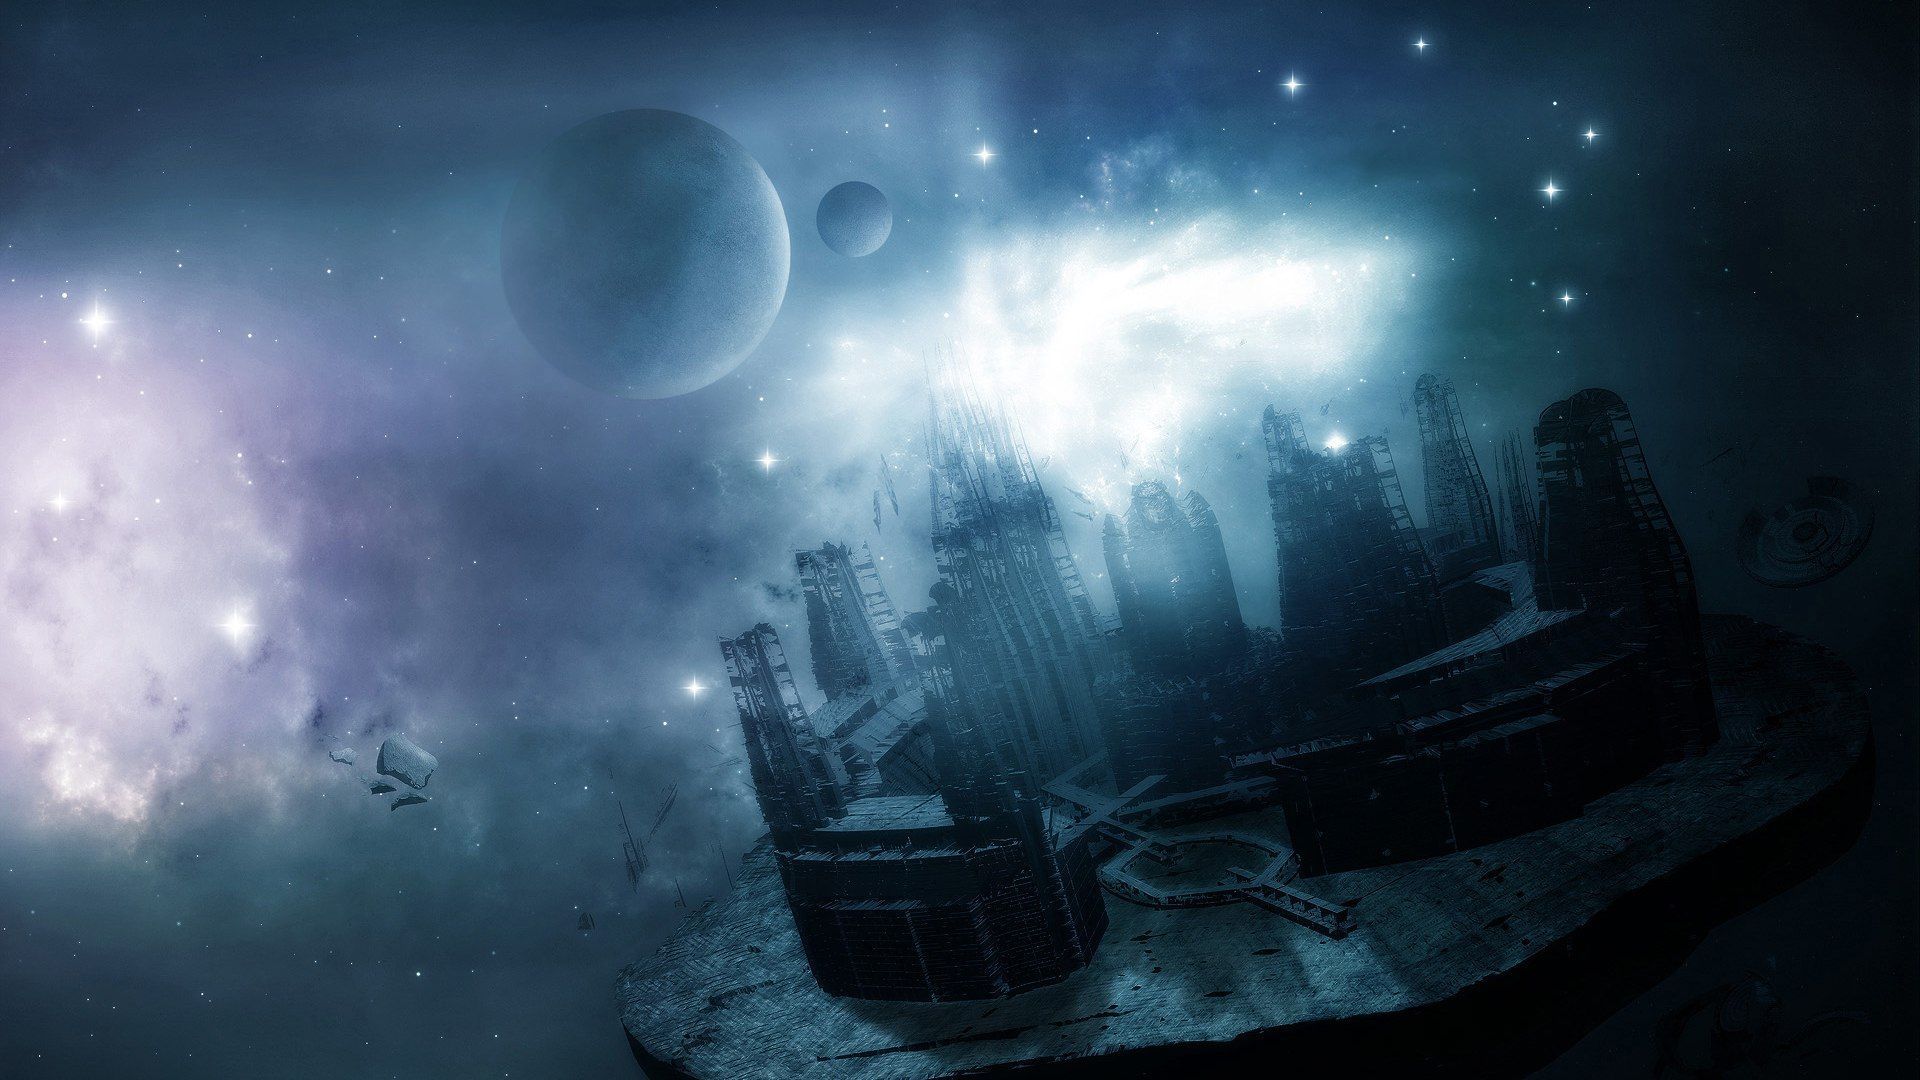 3d space scene wallpaper 1920x1080 - (#25420) - High Quality and ...